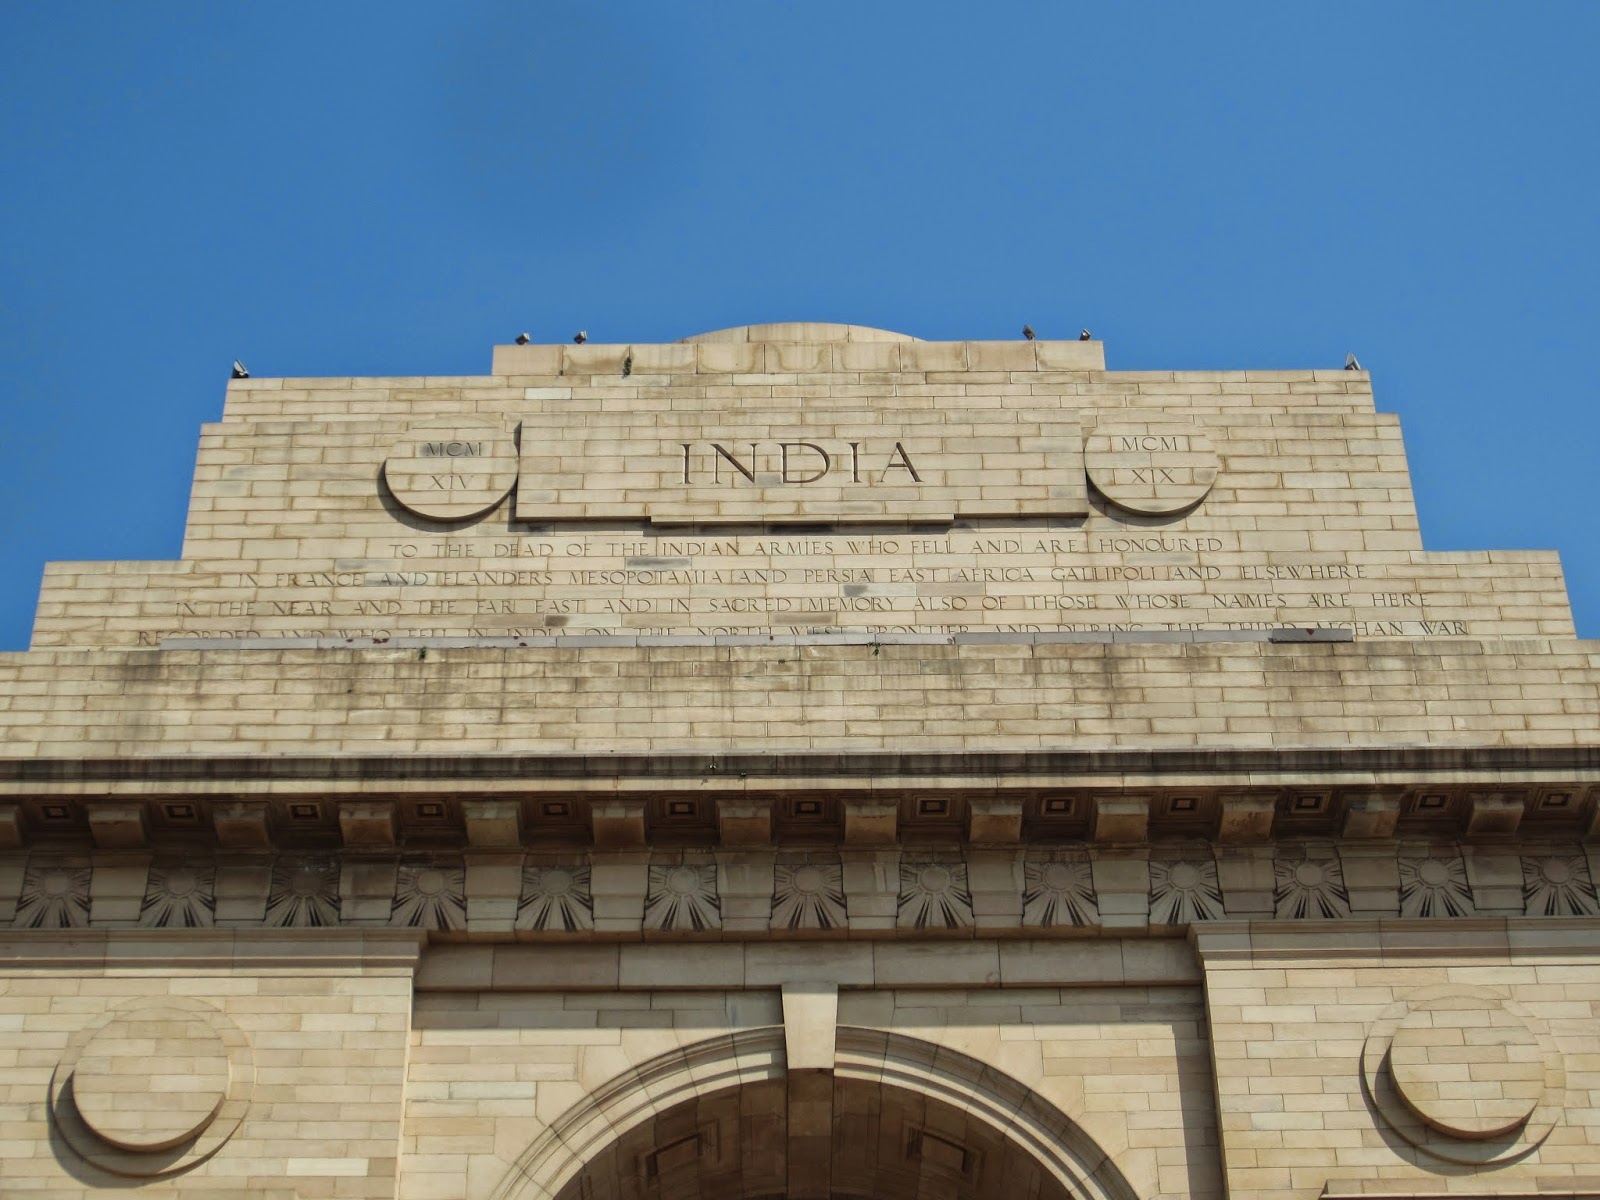 Essay on india gate for kids